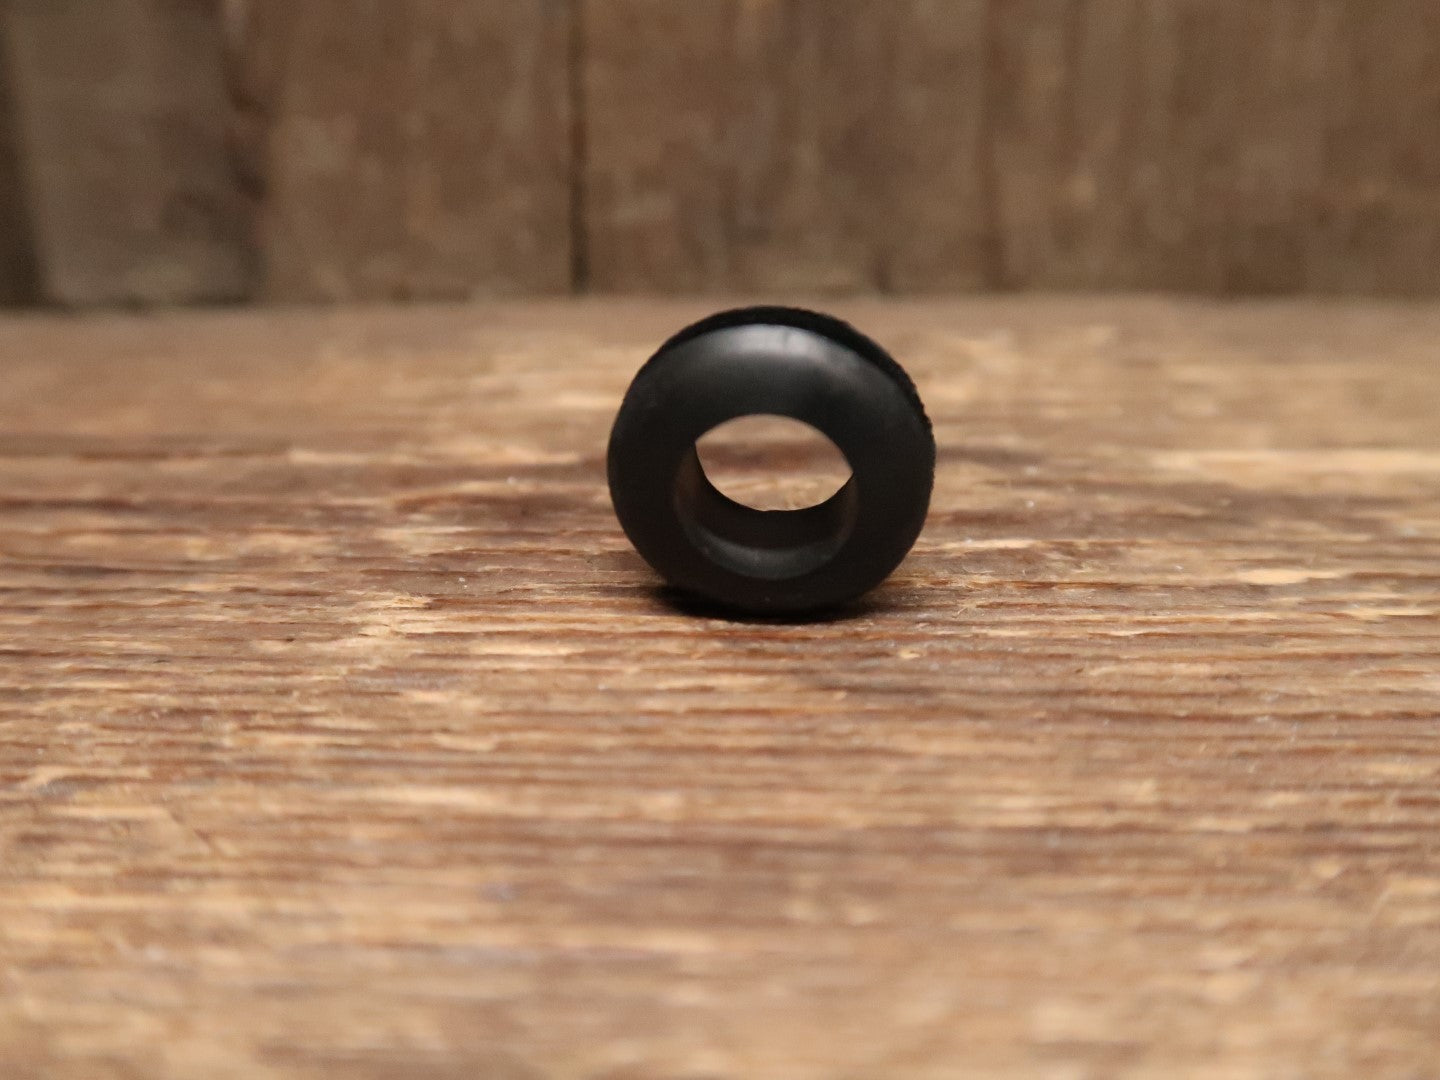 Boss Roland switch rubber ring / grommet